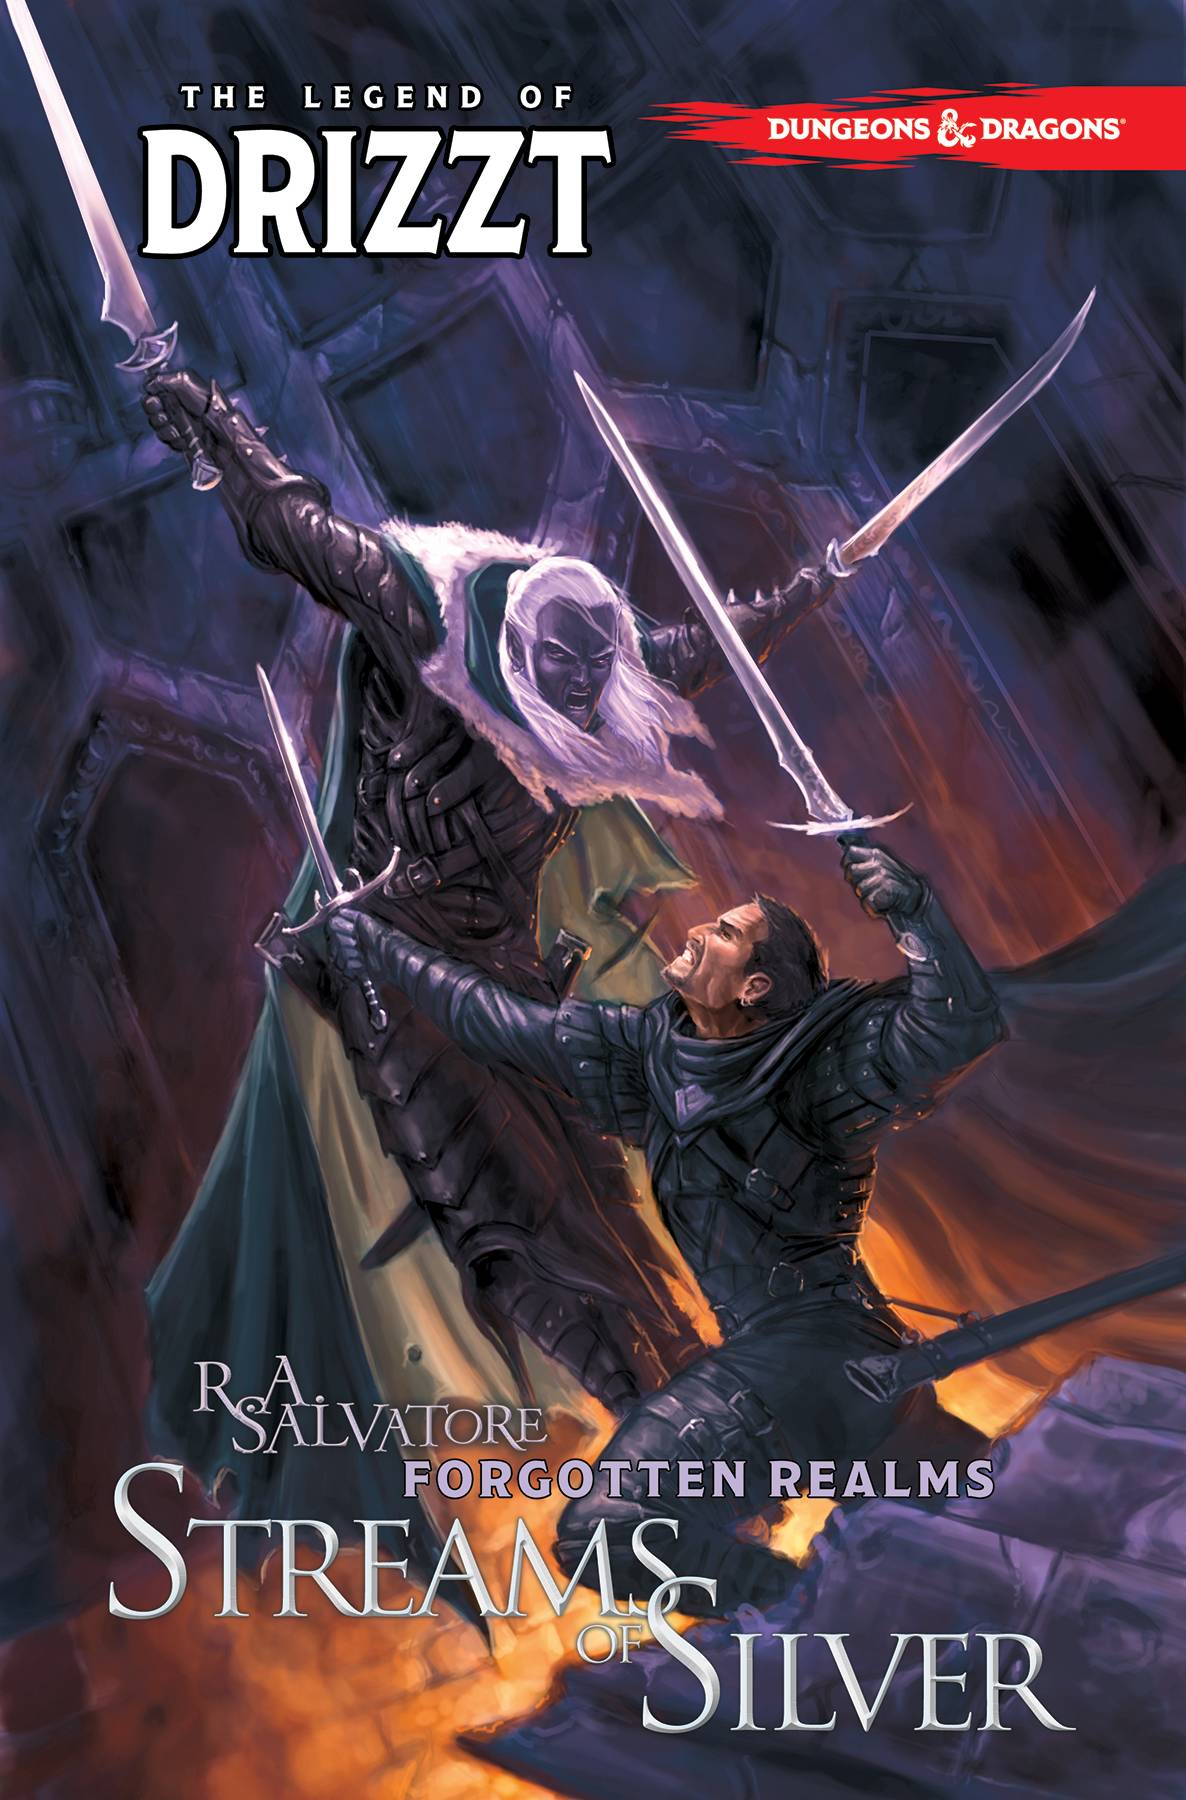 Dungeons & Dragons Legend of Drizzt Graphic Novel Volume 5 Streams of Silver